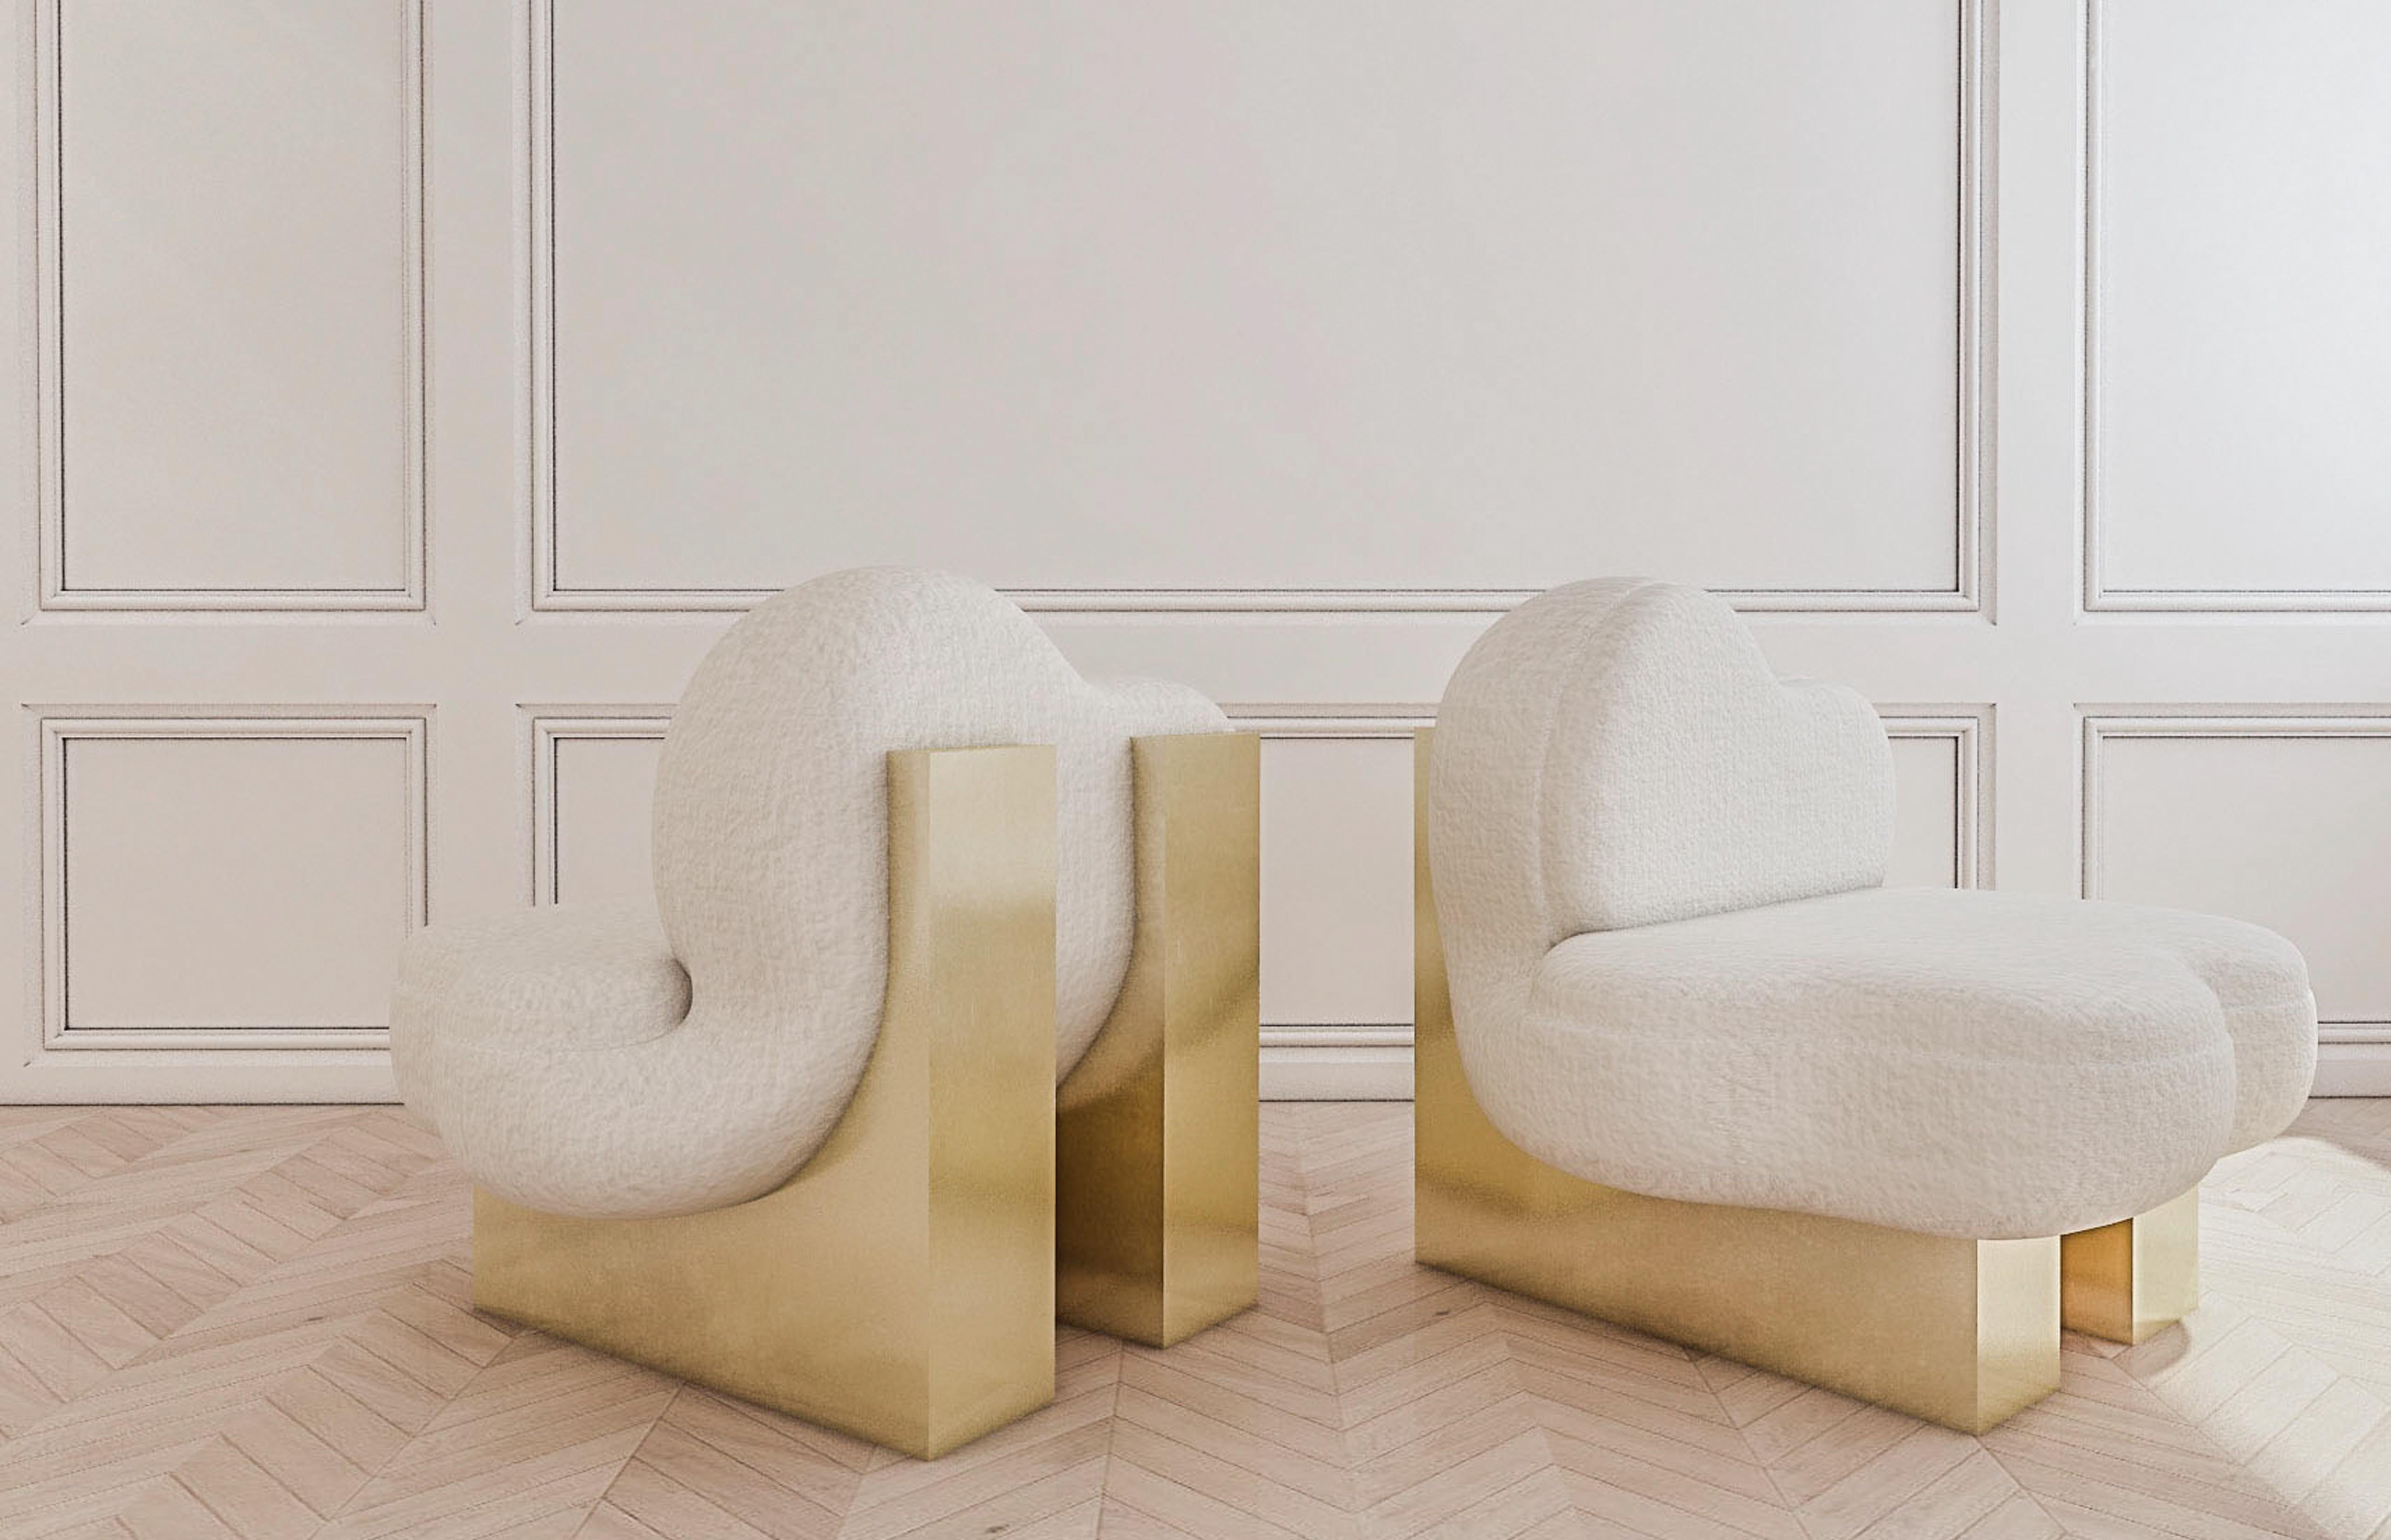 Set of 2 splash lounge chair by Melis Tatlicibasi.
Materials: Velvet or boucle upsholery, natural wood, painted brass or silver

Dimensions: D 80 x W 70 x H 87 cm.

I Melis Tatlicibasi form Turkey, am an Interior Designer. She graduated from